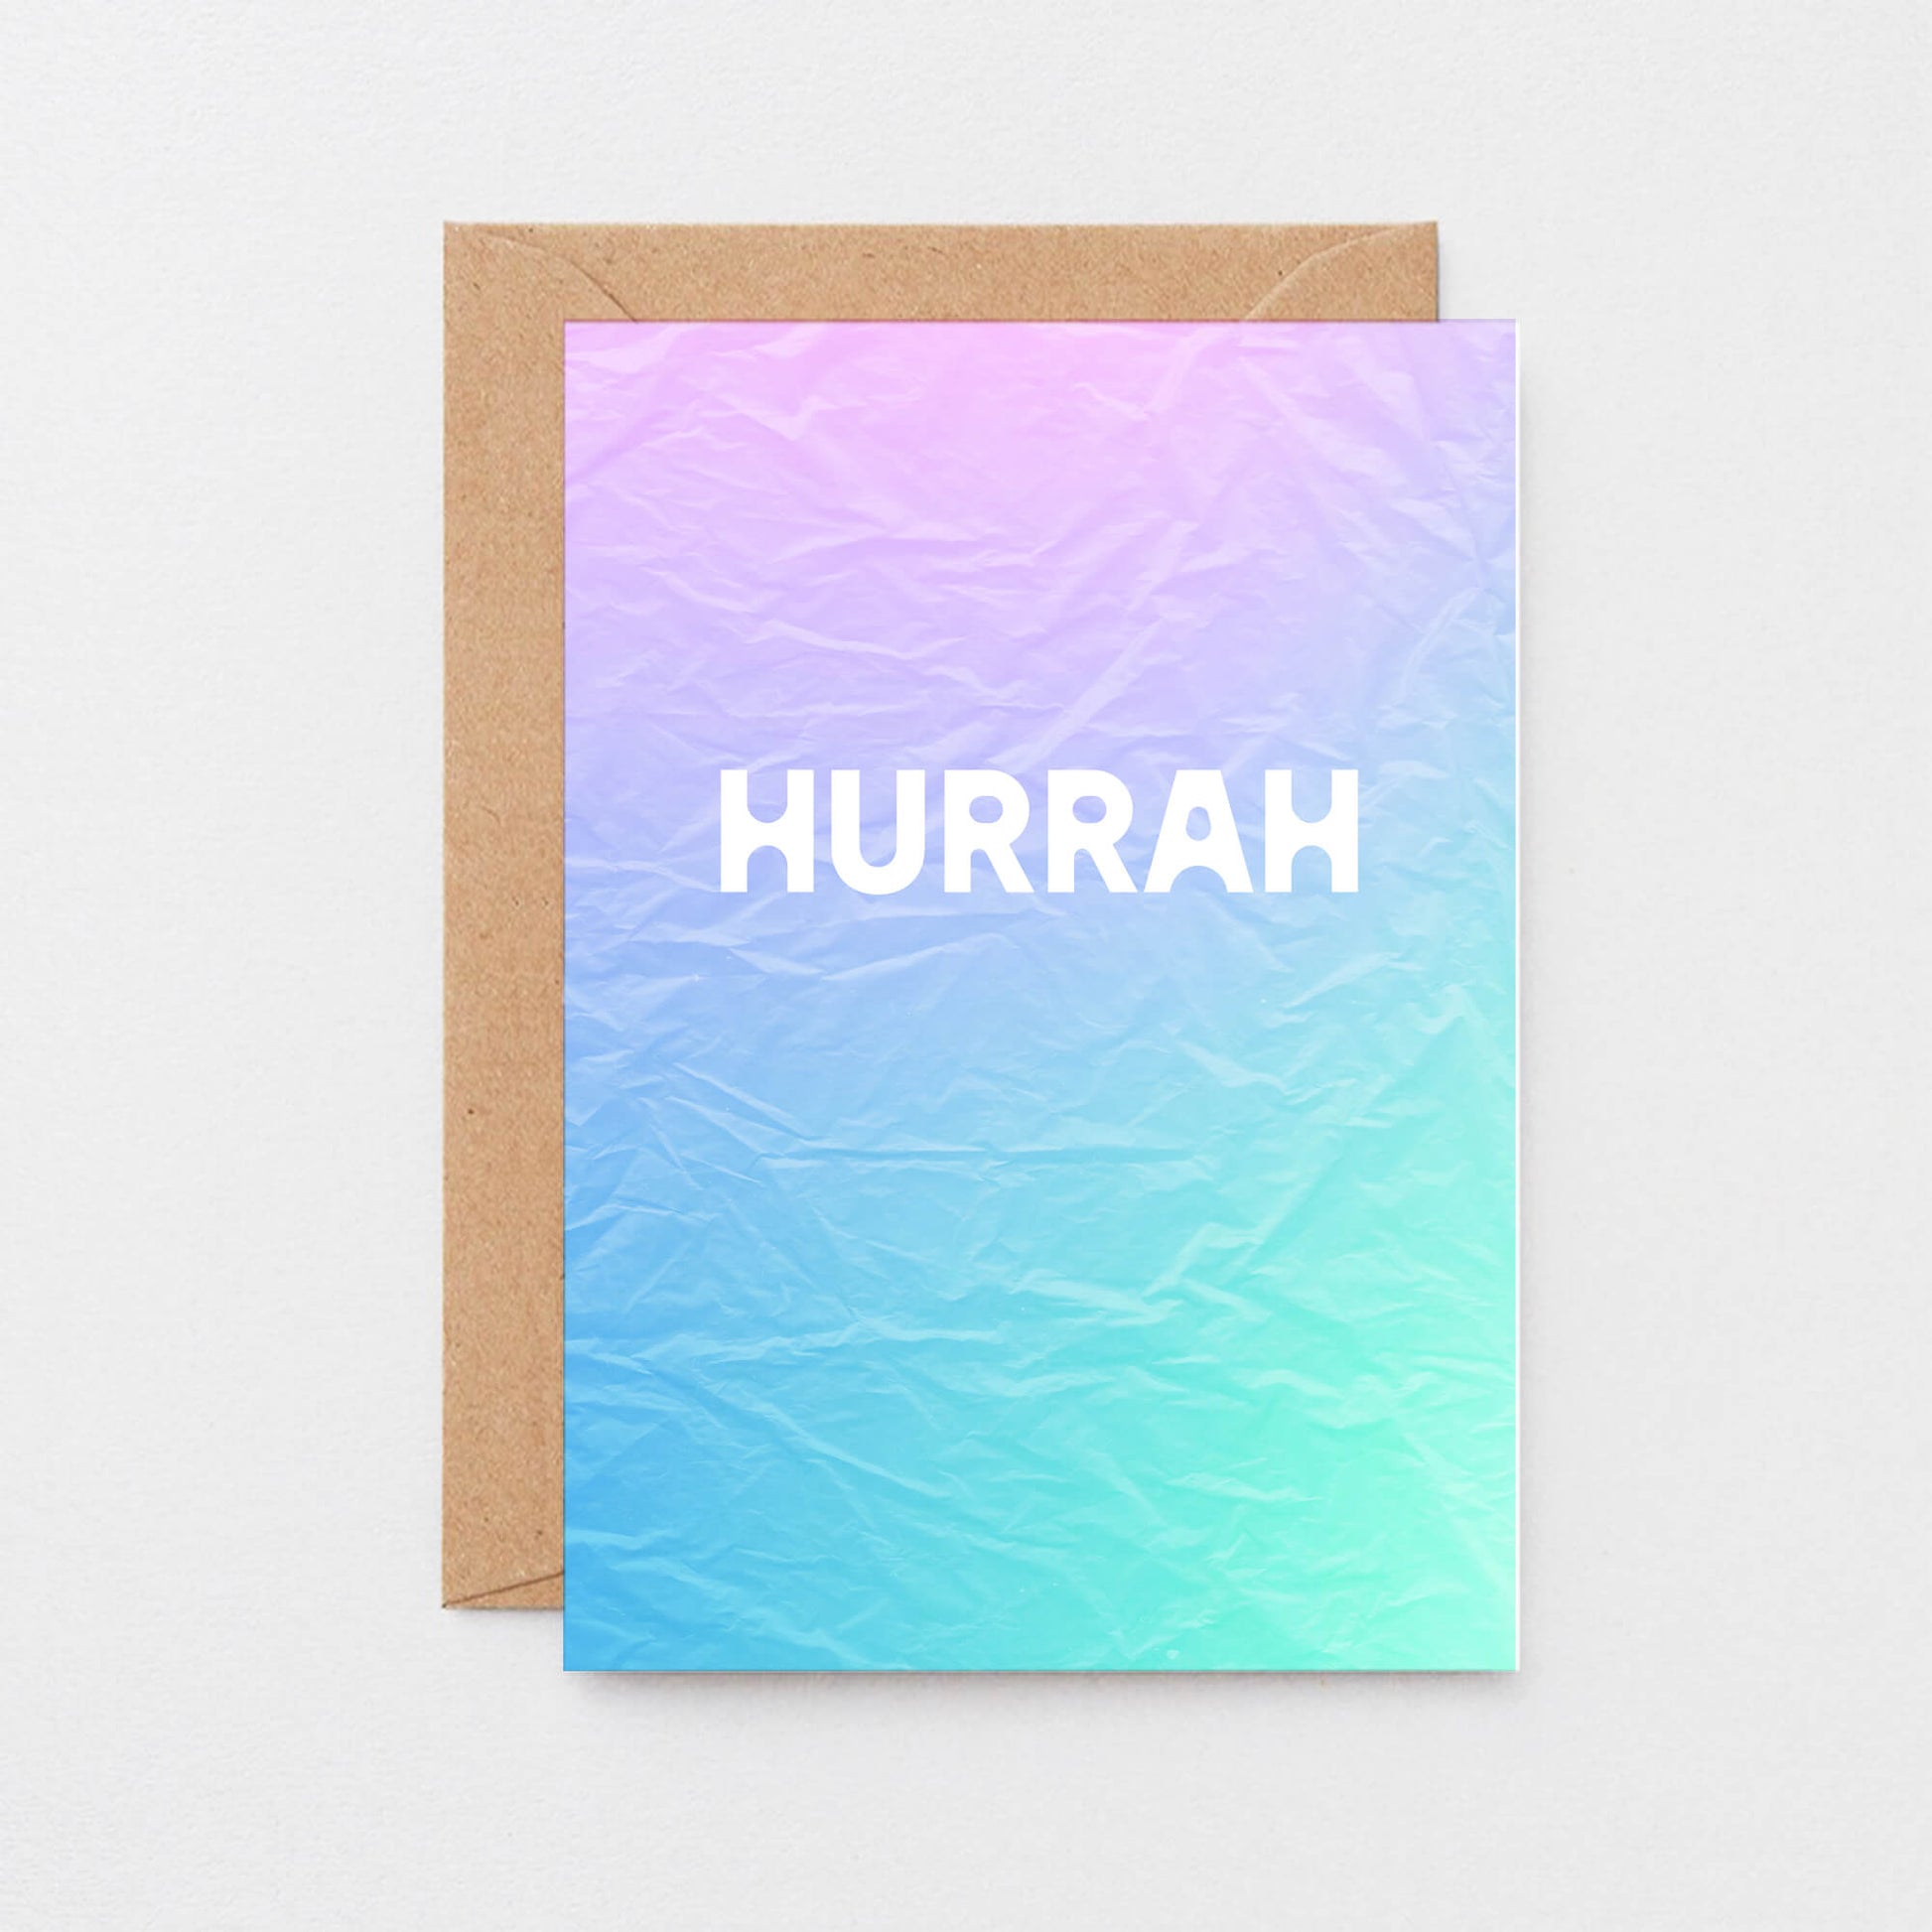 Hurrah Card by SixElevenCreations. Product Code SE4002A6